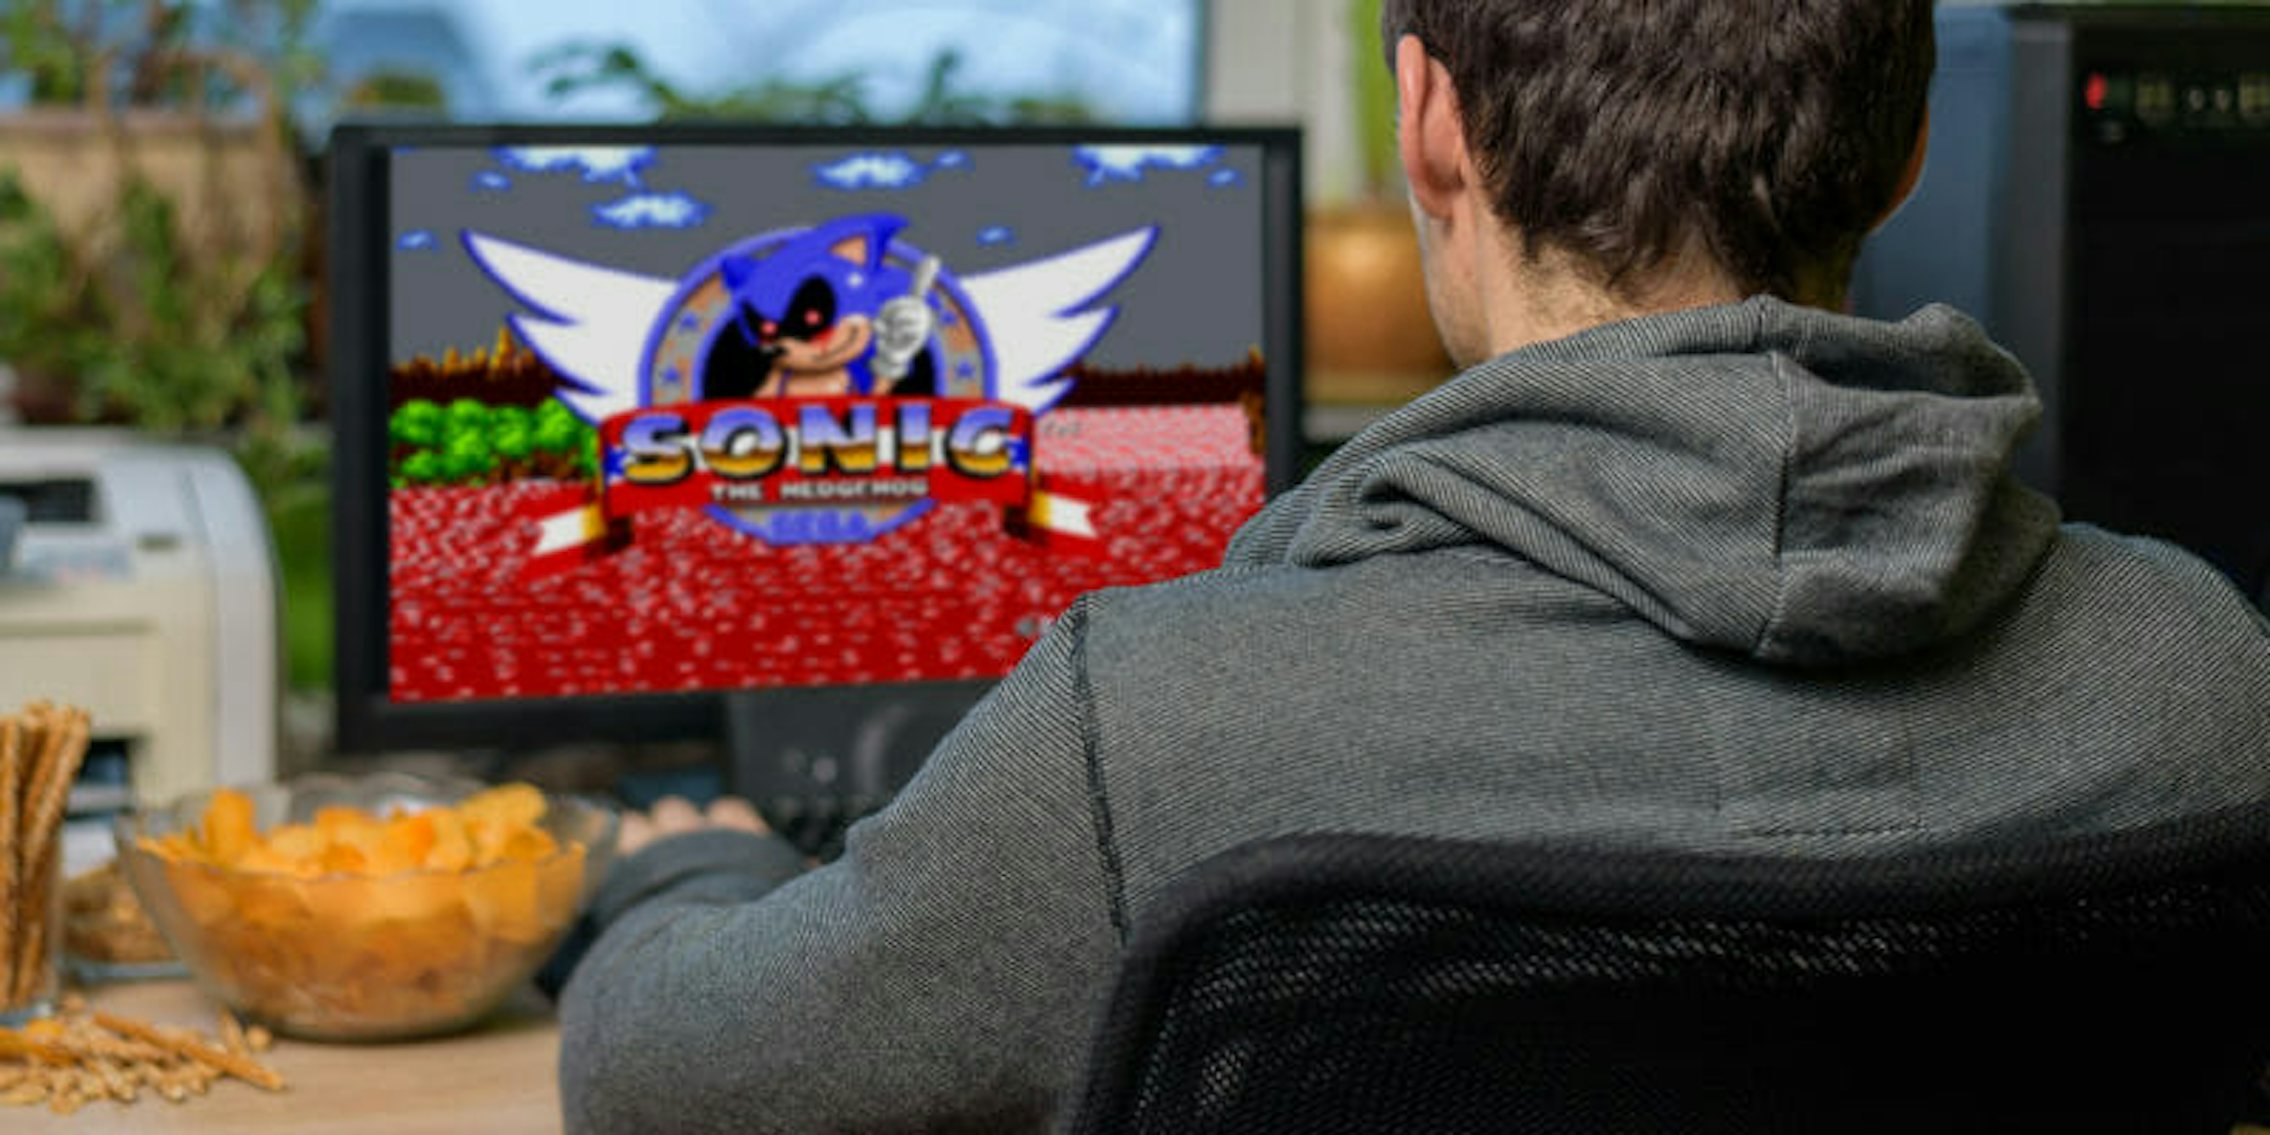 Discuss Everything About The Sonic Exe Wiki